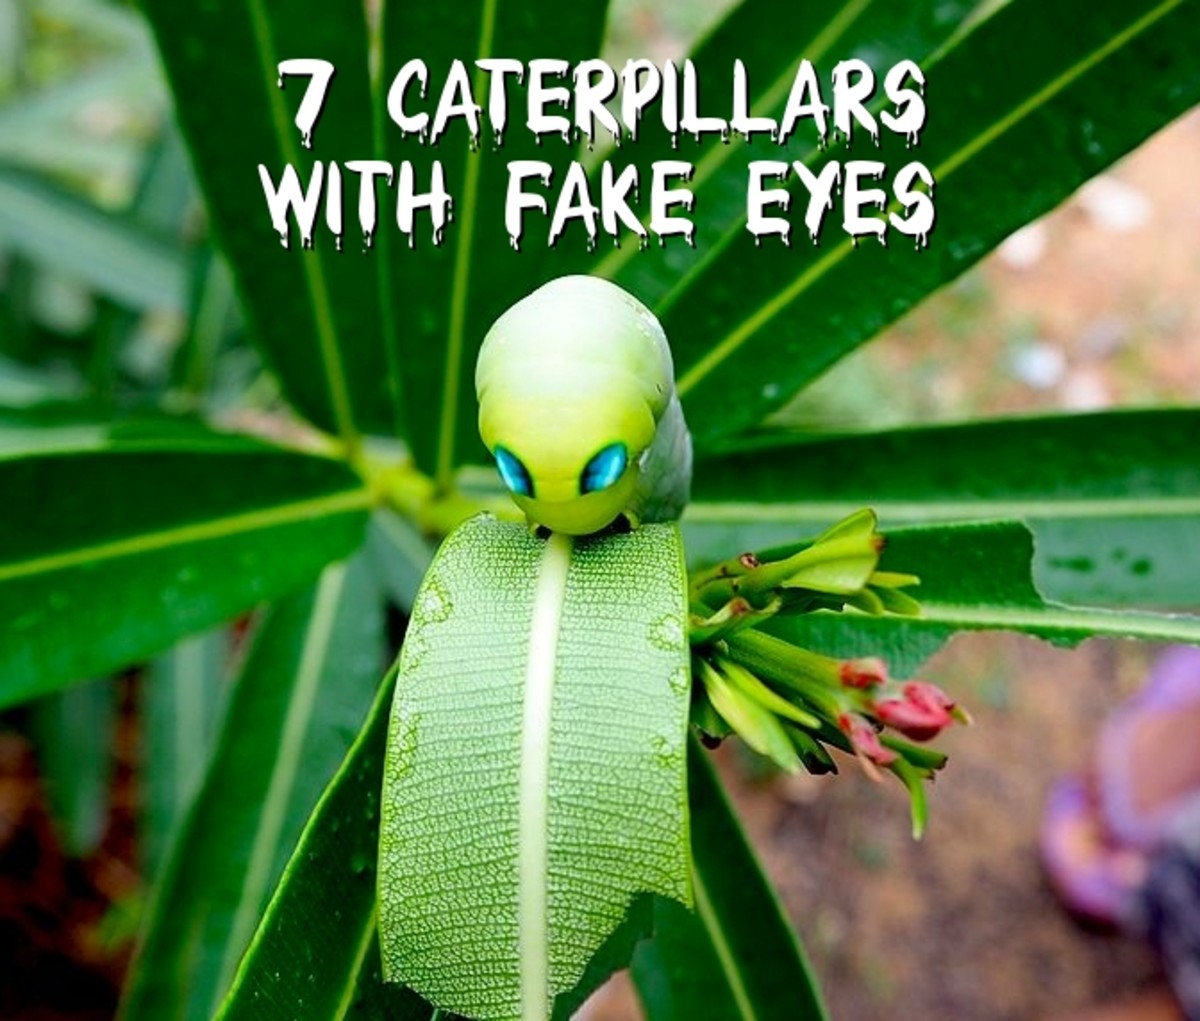 This guide will look at seven caterpillars with eyespots and what potential threats they may pose to your garden.